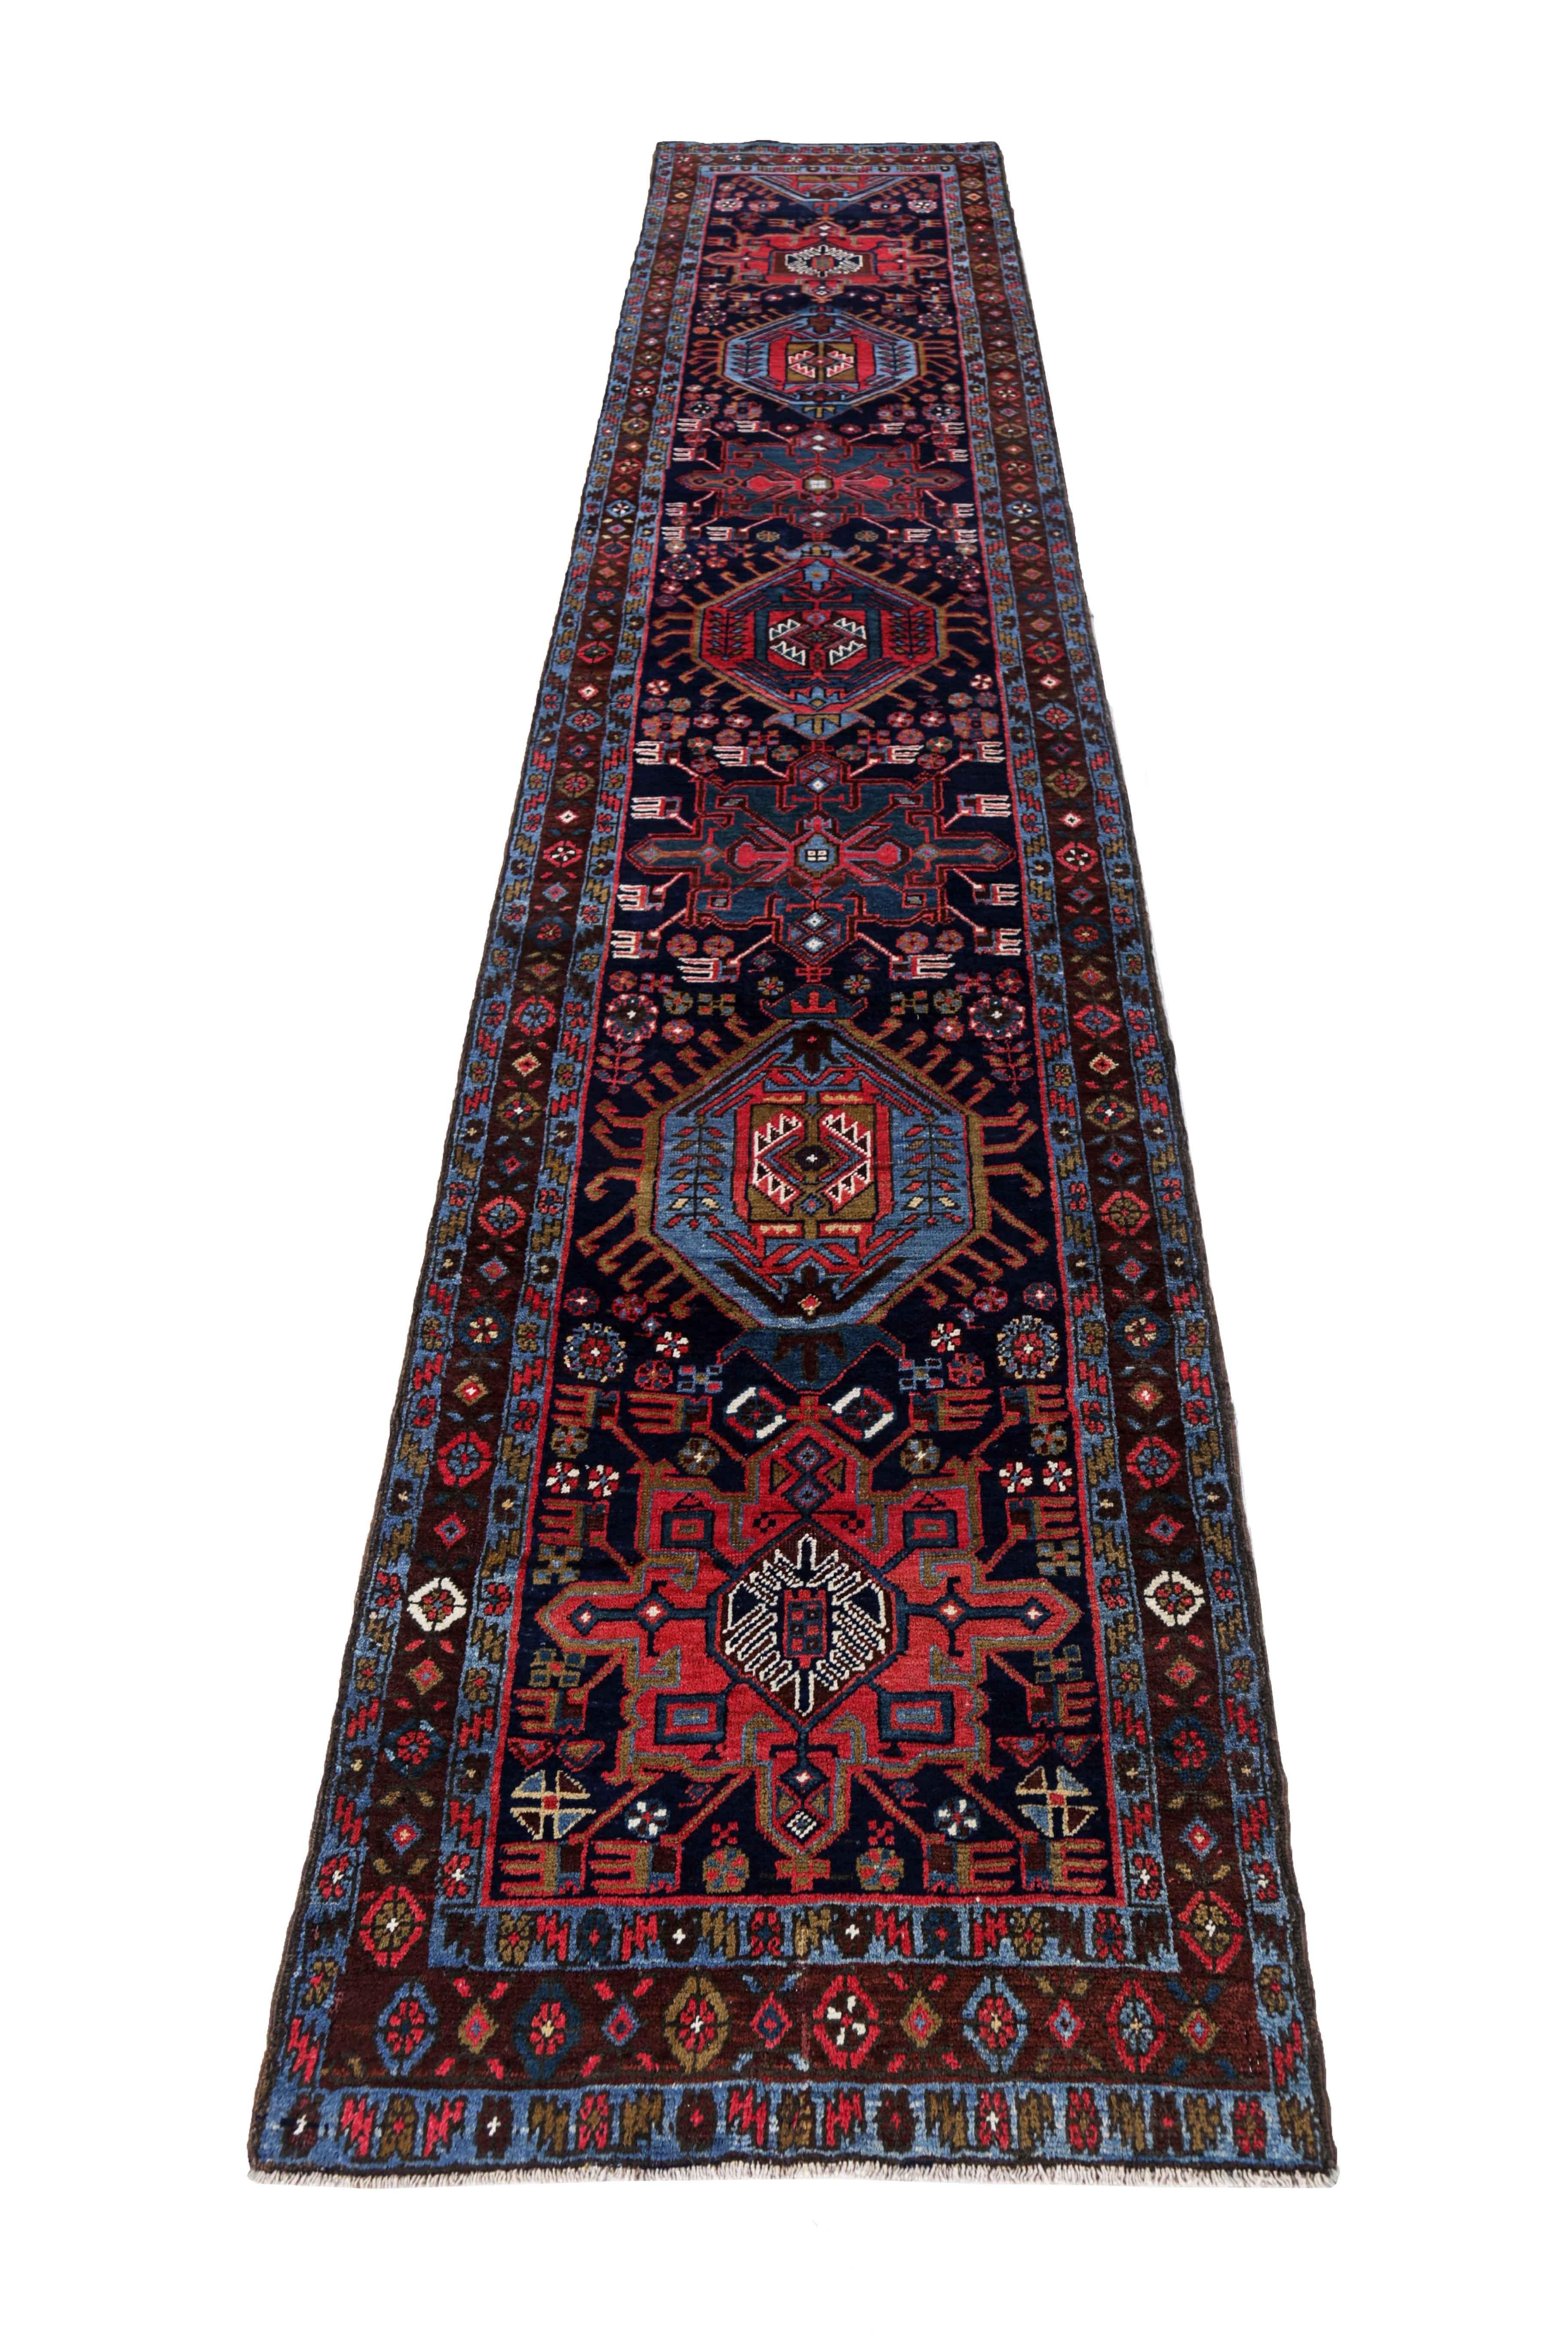 Antique Persian runner handwoven from the finest sheep’s wool. It’s colored with all-natural vegetable dyes that are safe for humans and pets. It’s a traditional Heriz design handwoven by expert artisans.It’s a lovely runner rug that can be